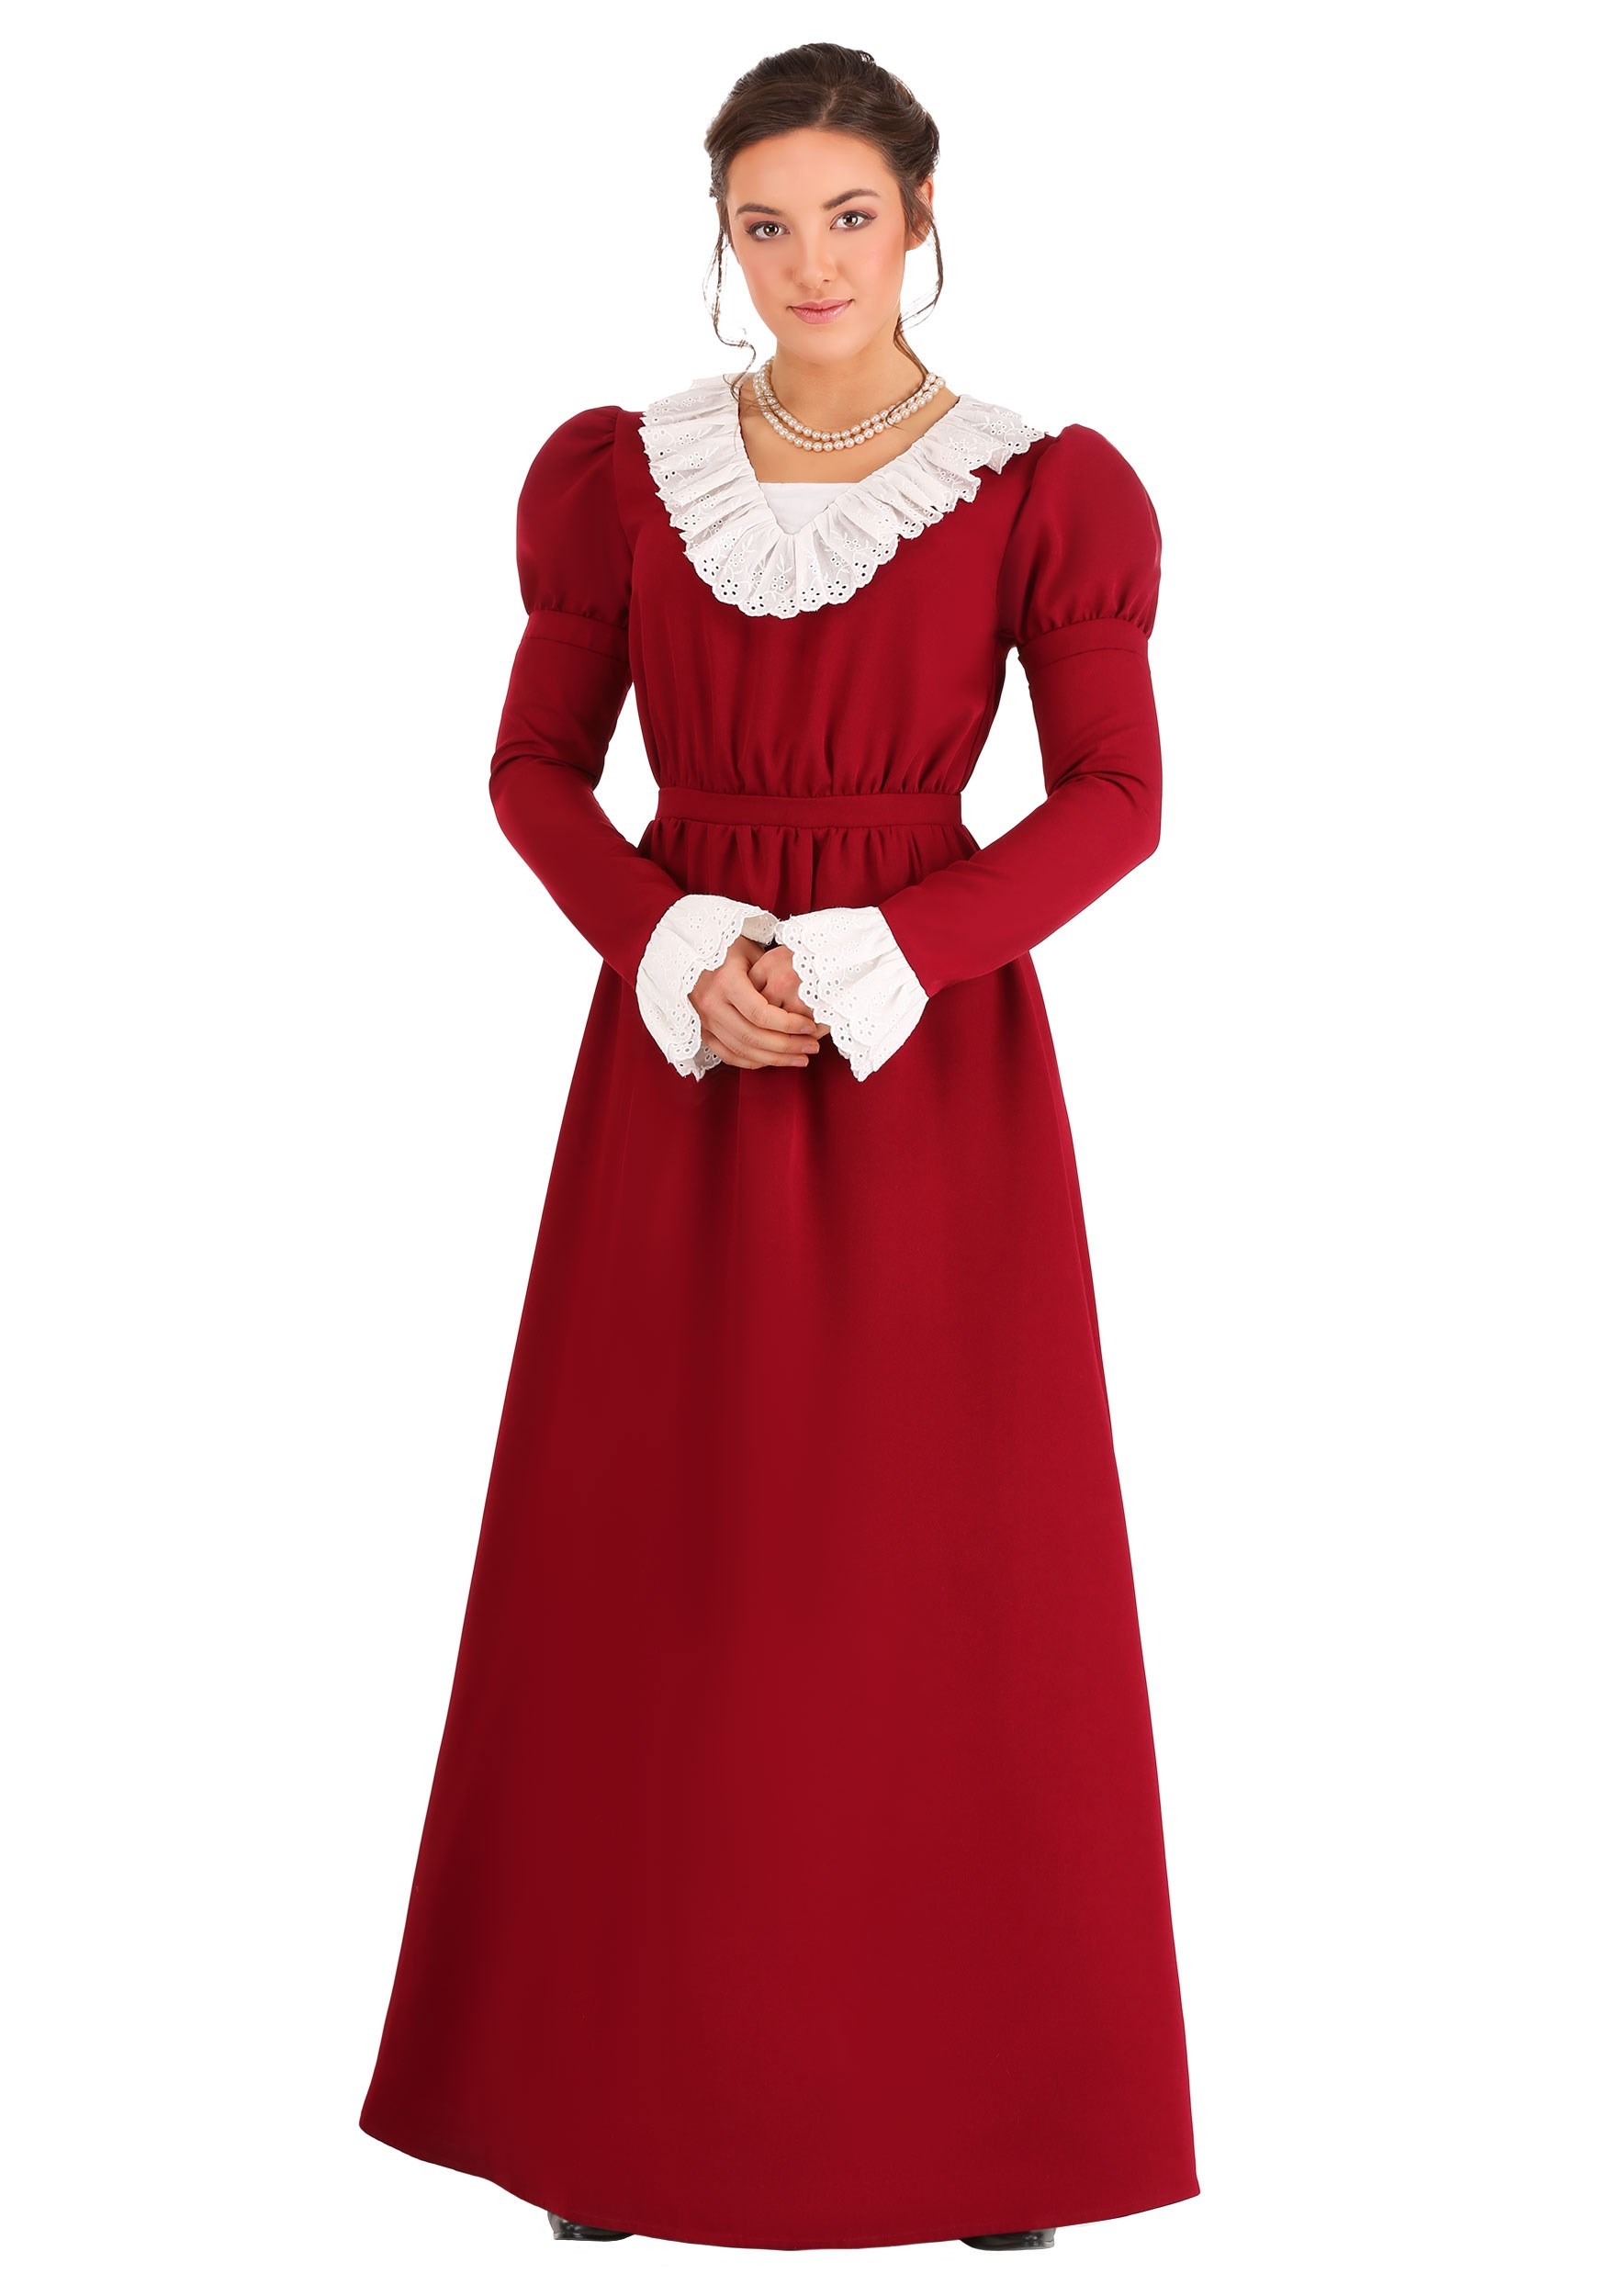 Photos - Fancy Dress Adams FUN Costumes Abigail  Women's Costume | Adult Historical Costumes Red 